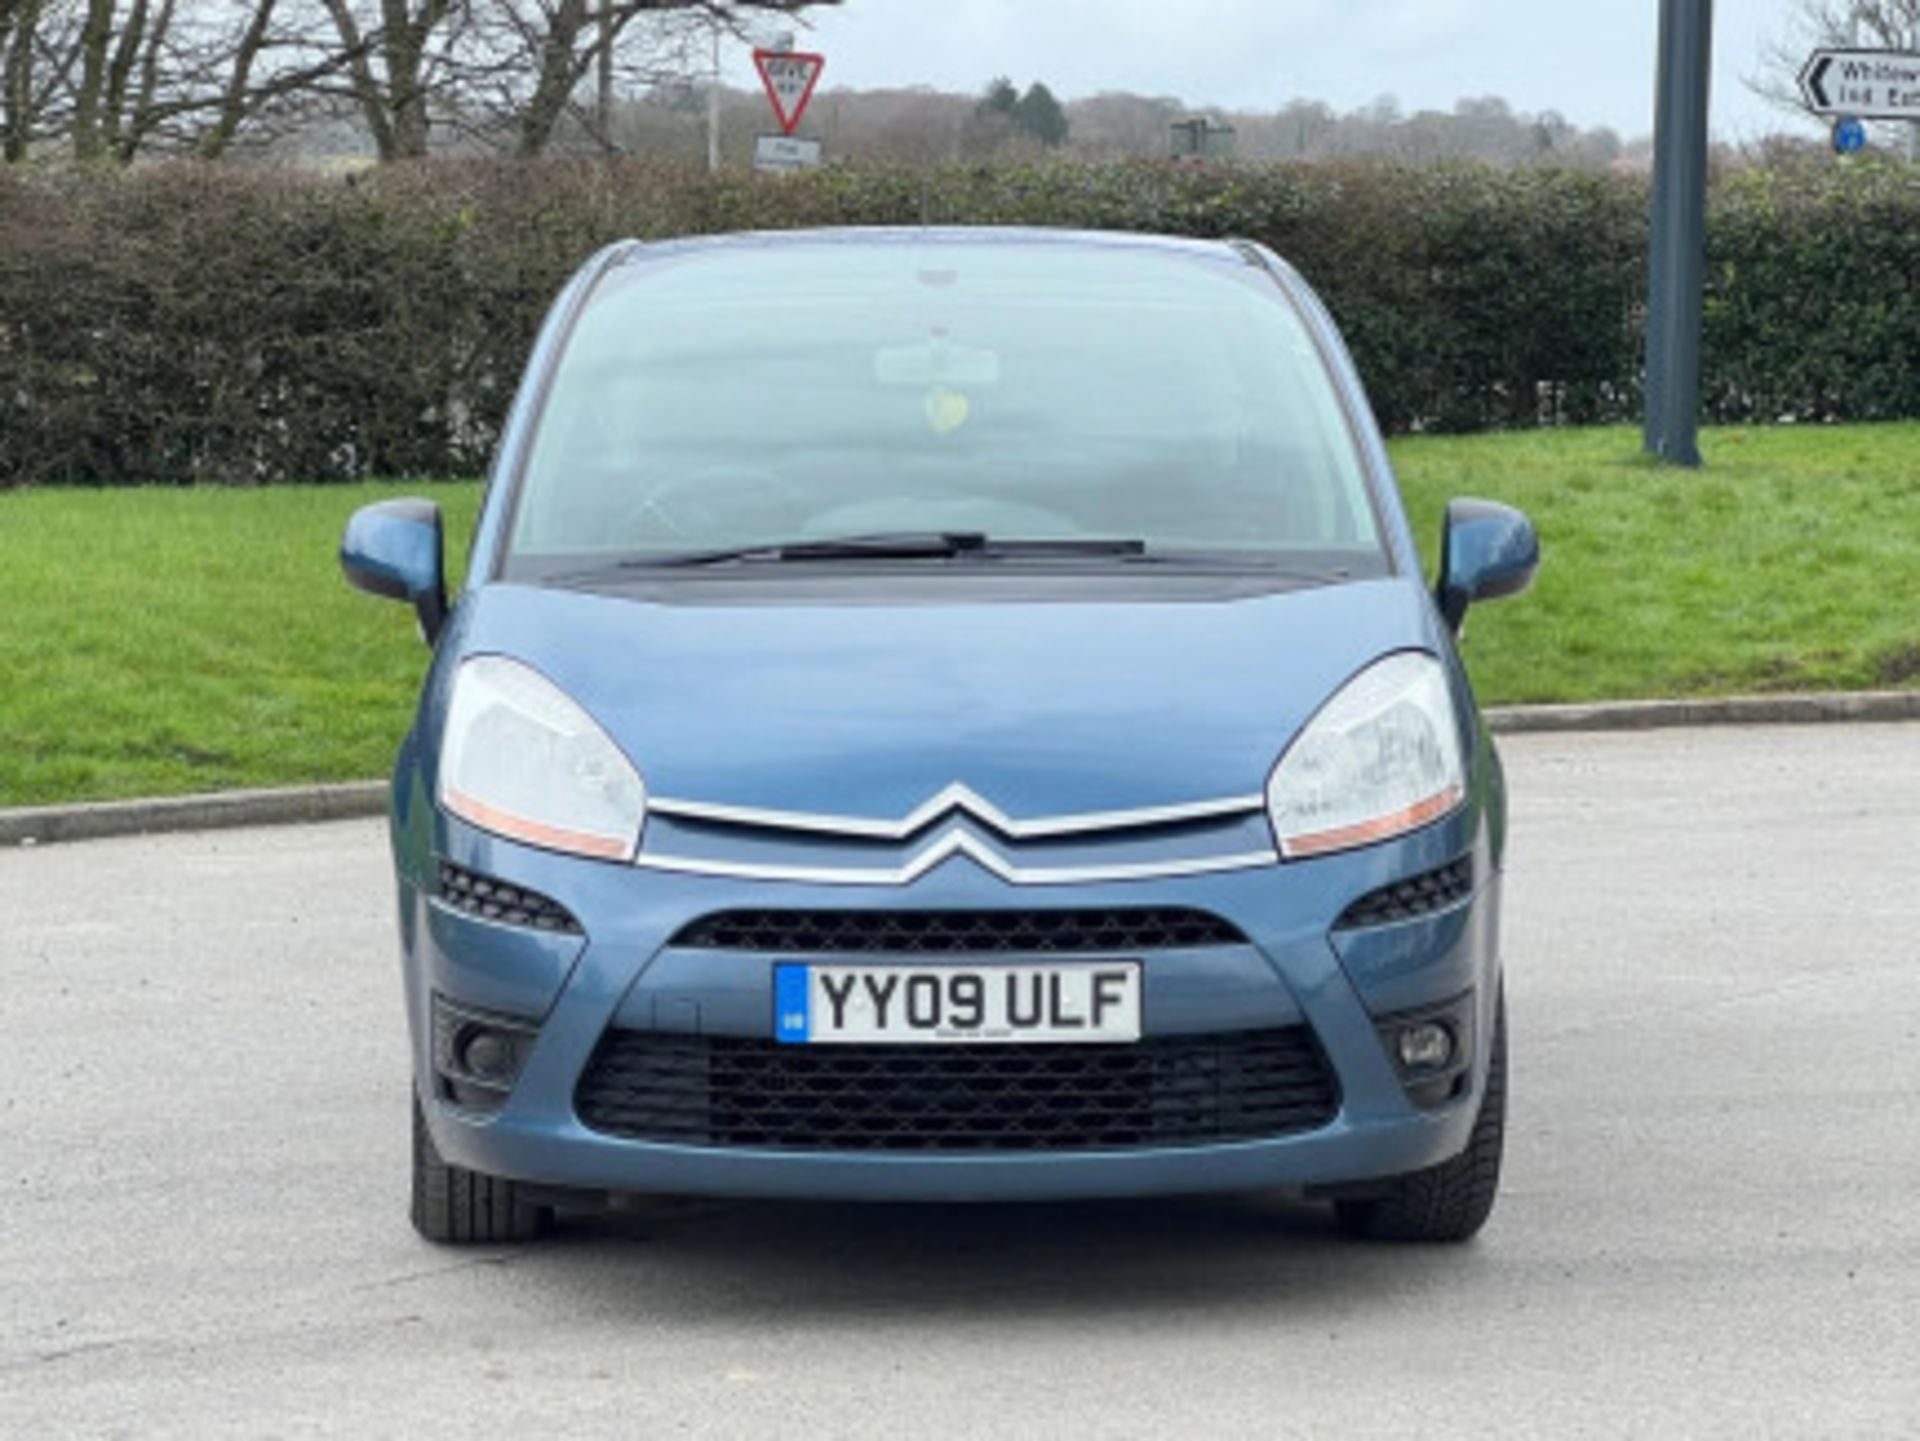 2009 CITROEN C4 PICASSO 1.6 HDI VTR+ EGS6 5DR >>--NO VAT ON HAMMER--<< - Image 63 of 123